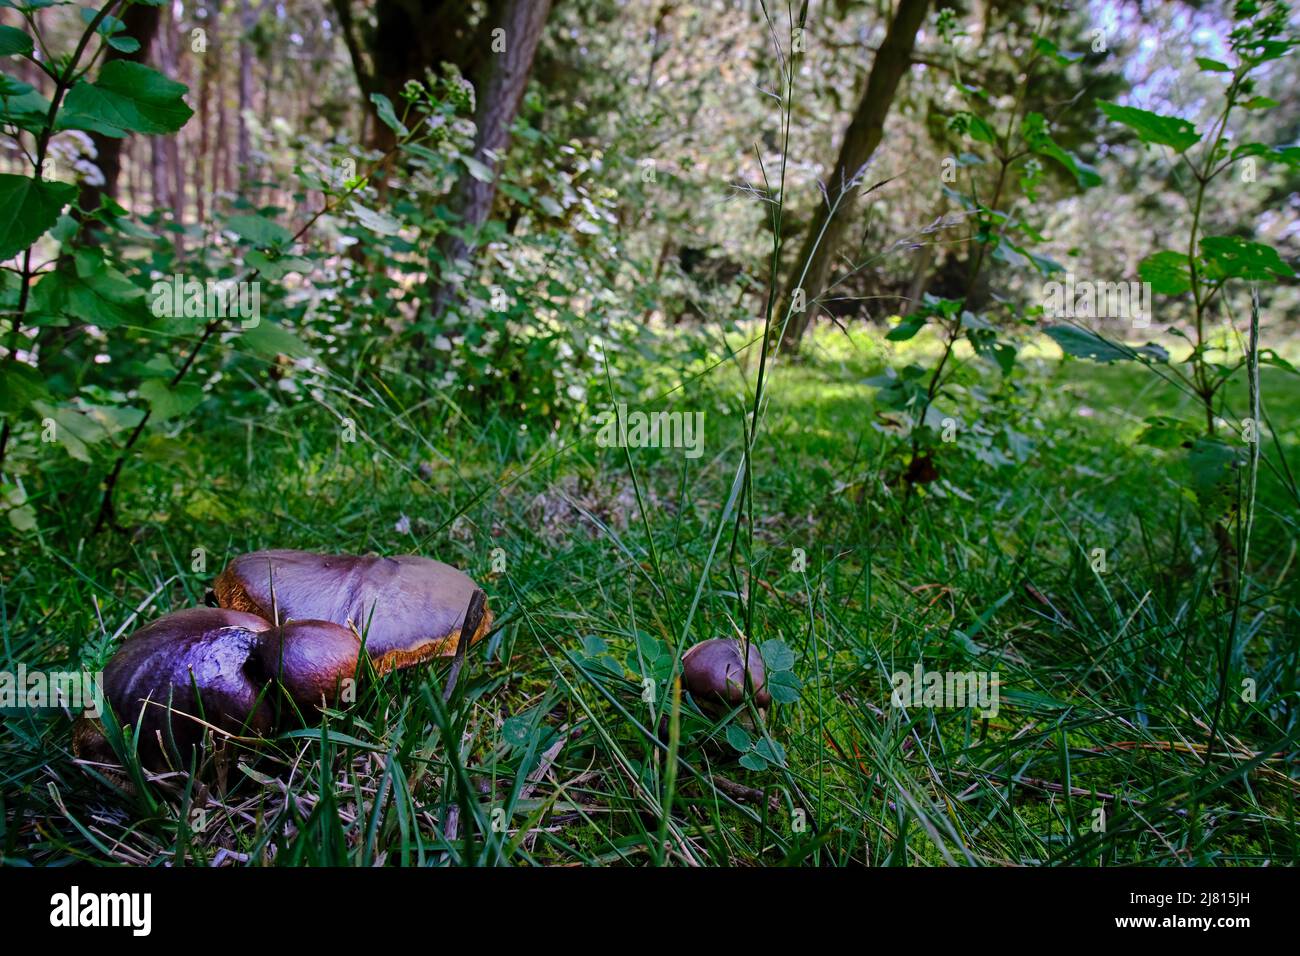 Edible mushroom (Suillus luteus), growing next to large pine trees, on the forest floor. Stock Photo